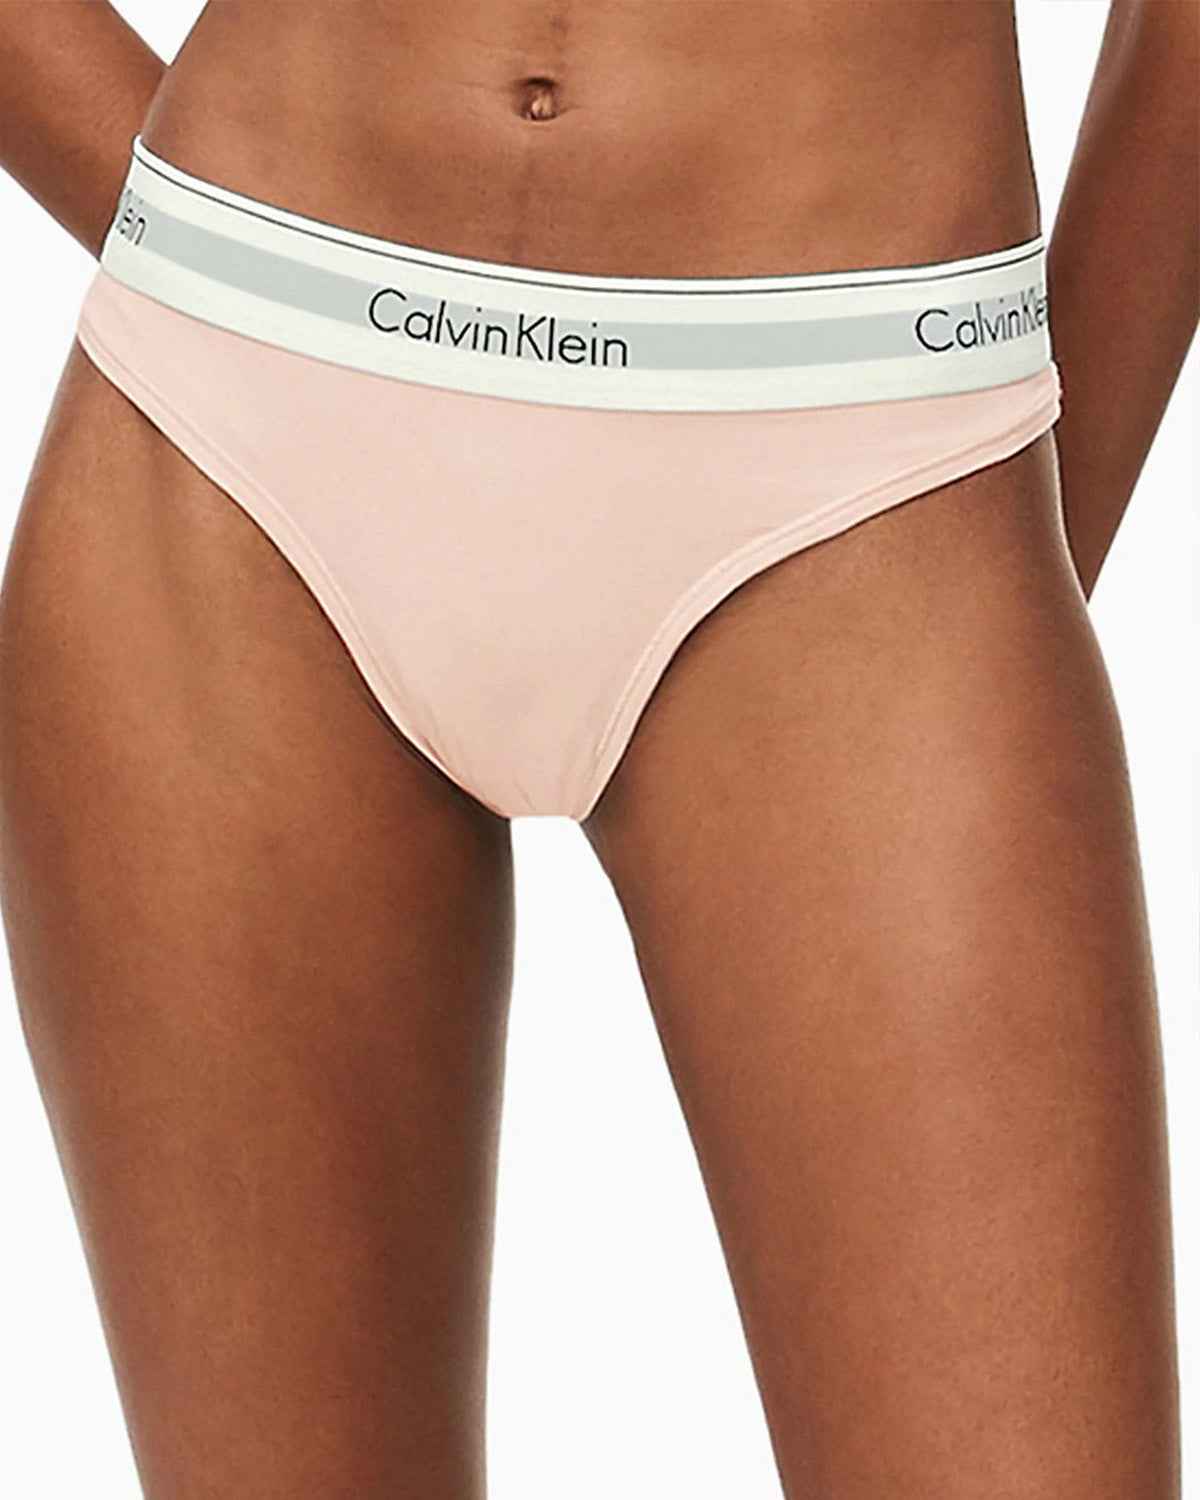 Calvin Klein, Bralettes, Boxers, Thongs and more